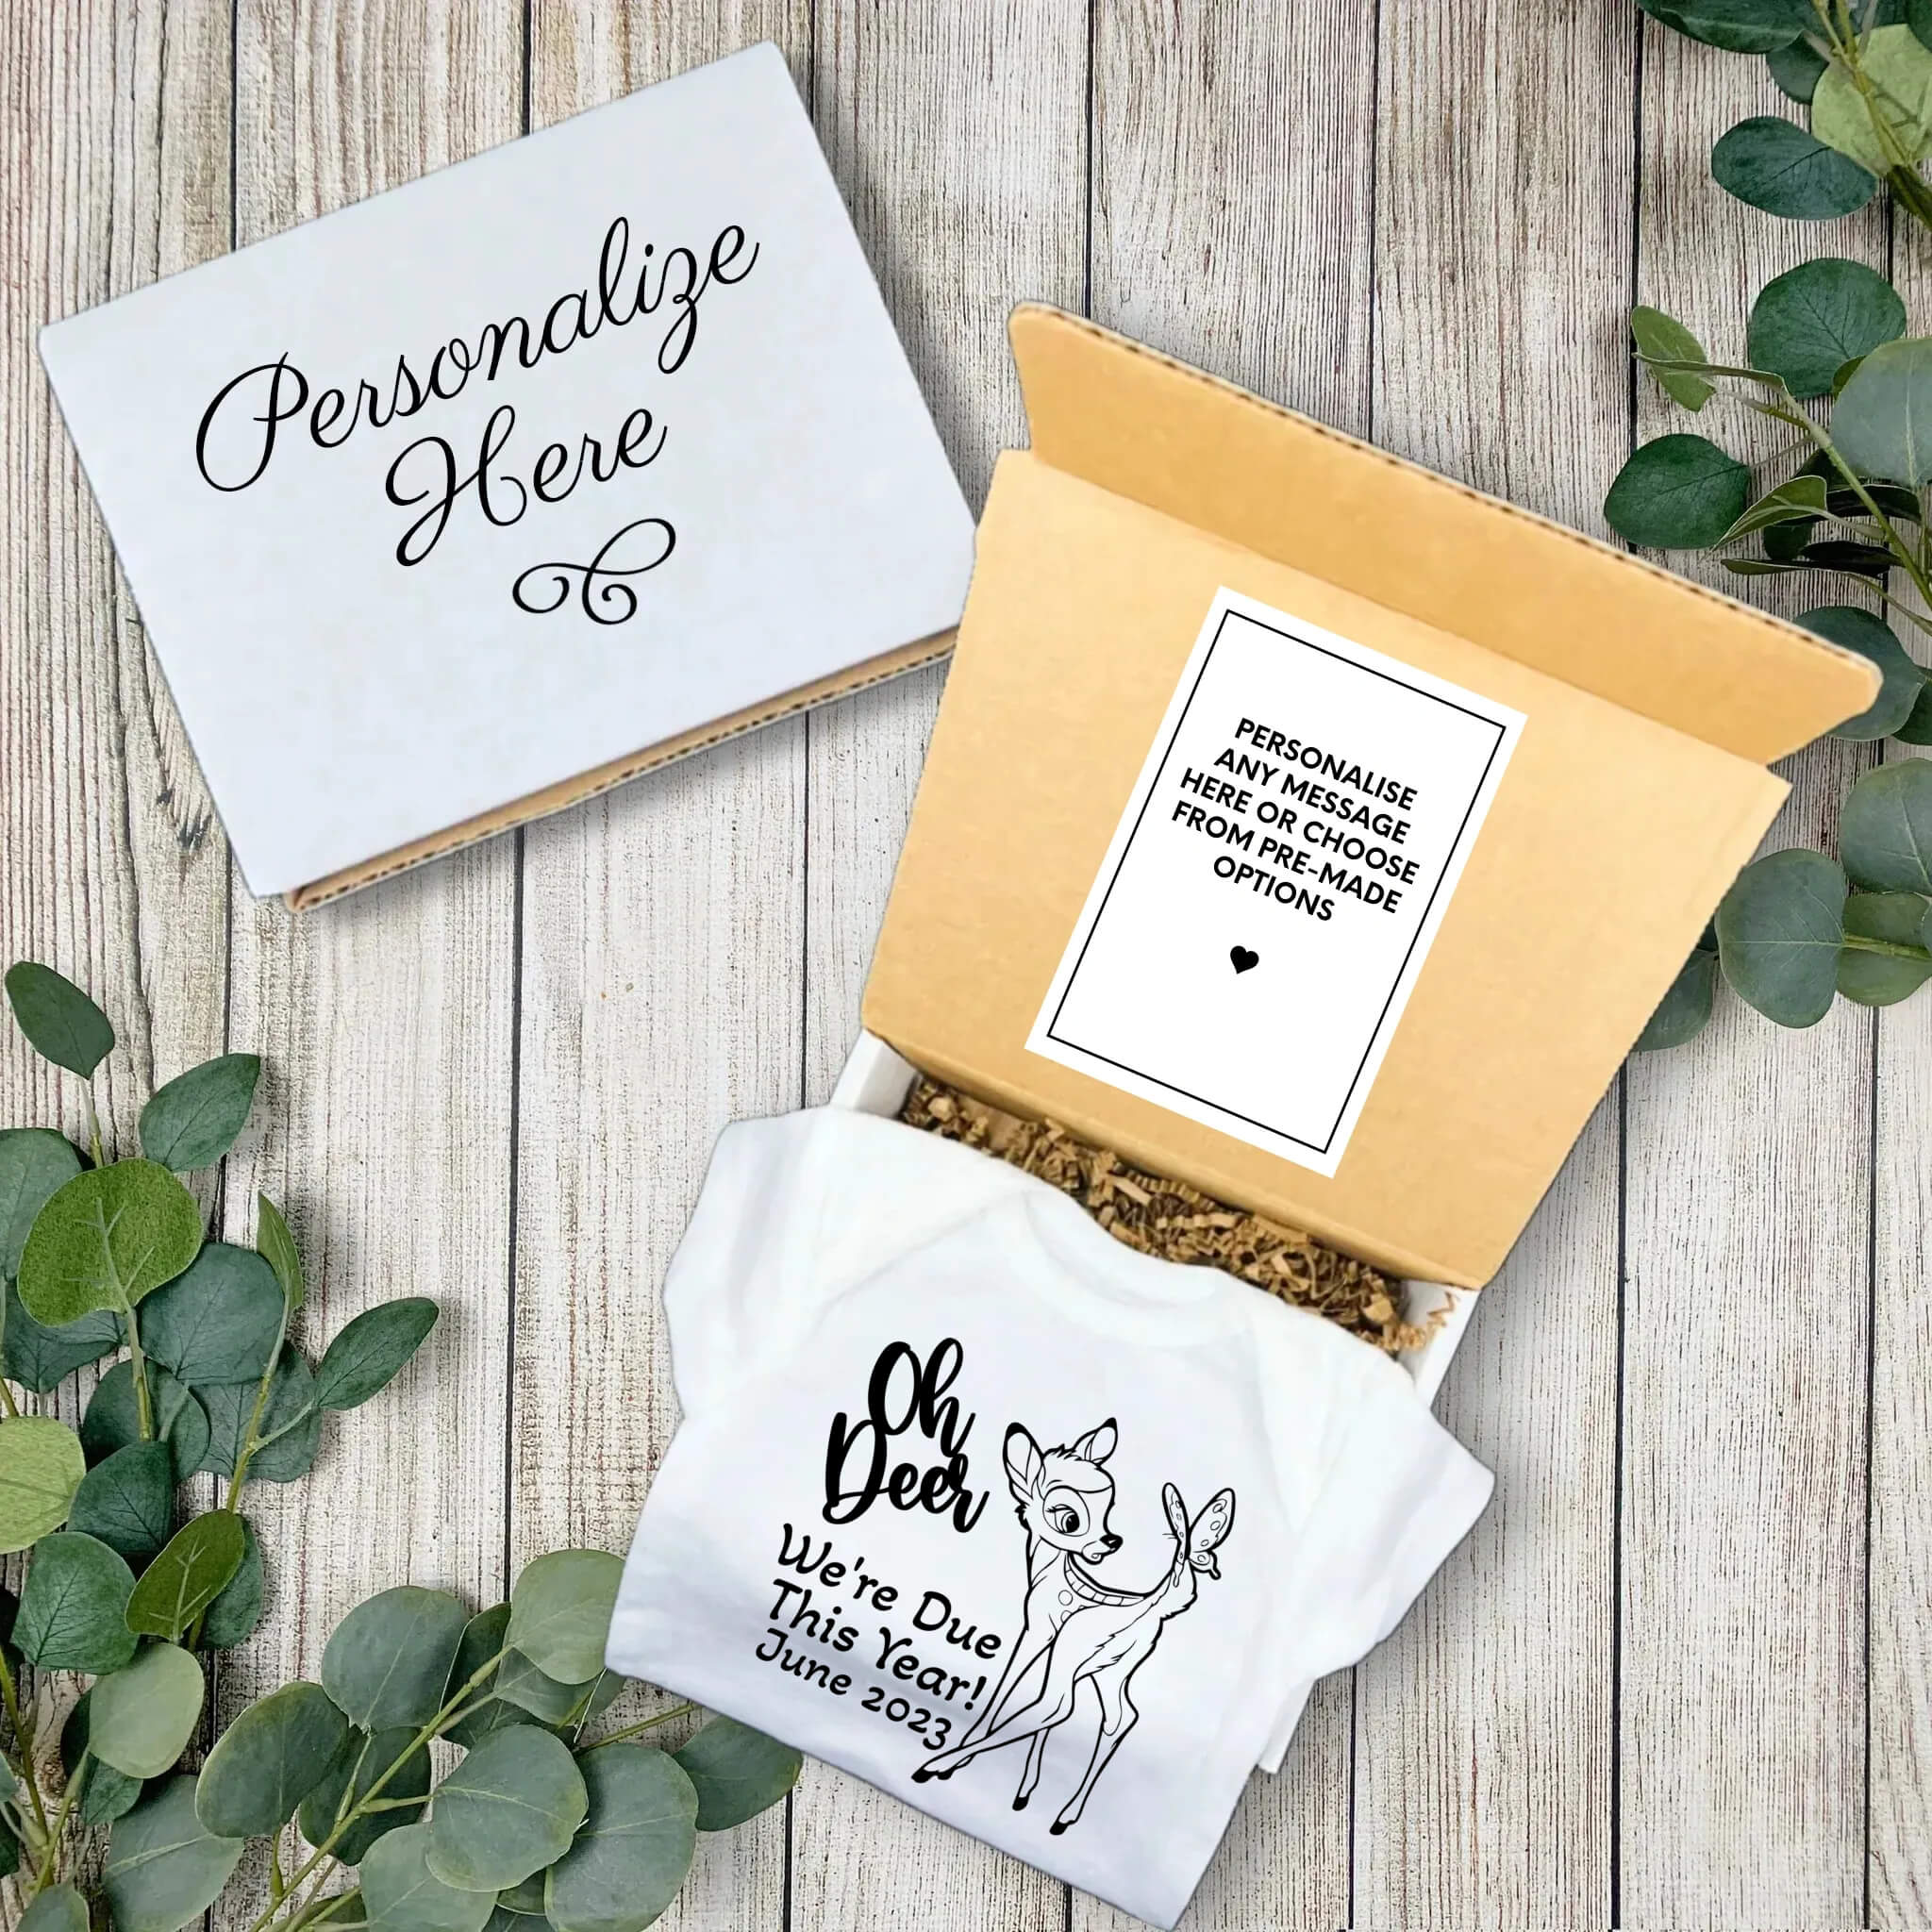 Personalized Pregnancy Announcement, Oh Deer We’re Due This Year, Dad, Grandma, Grandpa, Aunt, Uncle To Be, Customized Baby Fawn Announcement, Social Media Announcement, Gift Box Baby Announcement, Animated Movie Characters Pregnancy Announcement